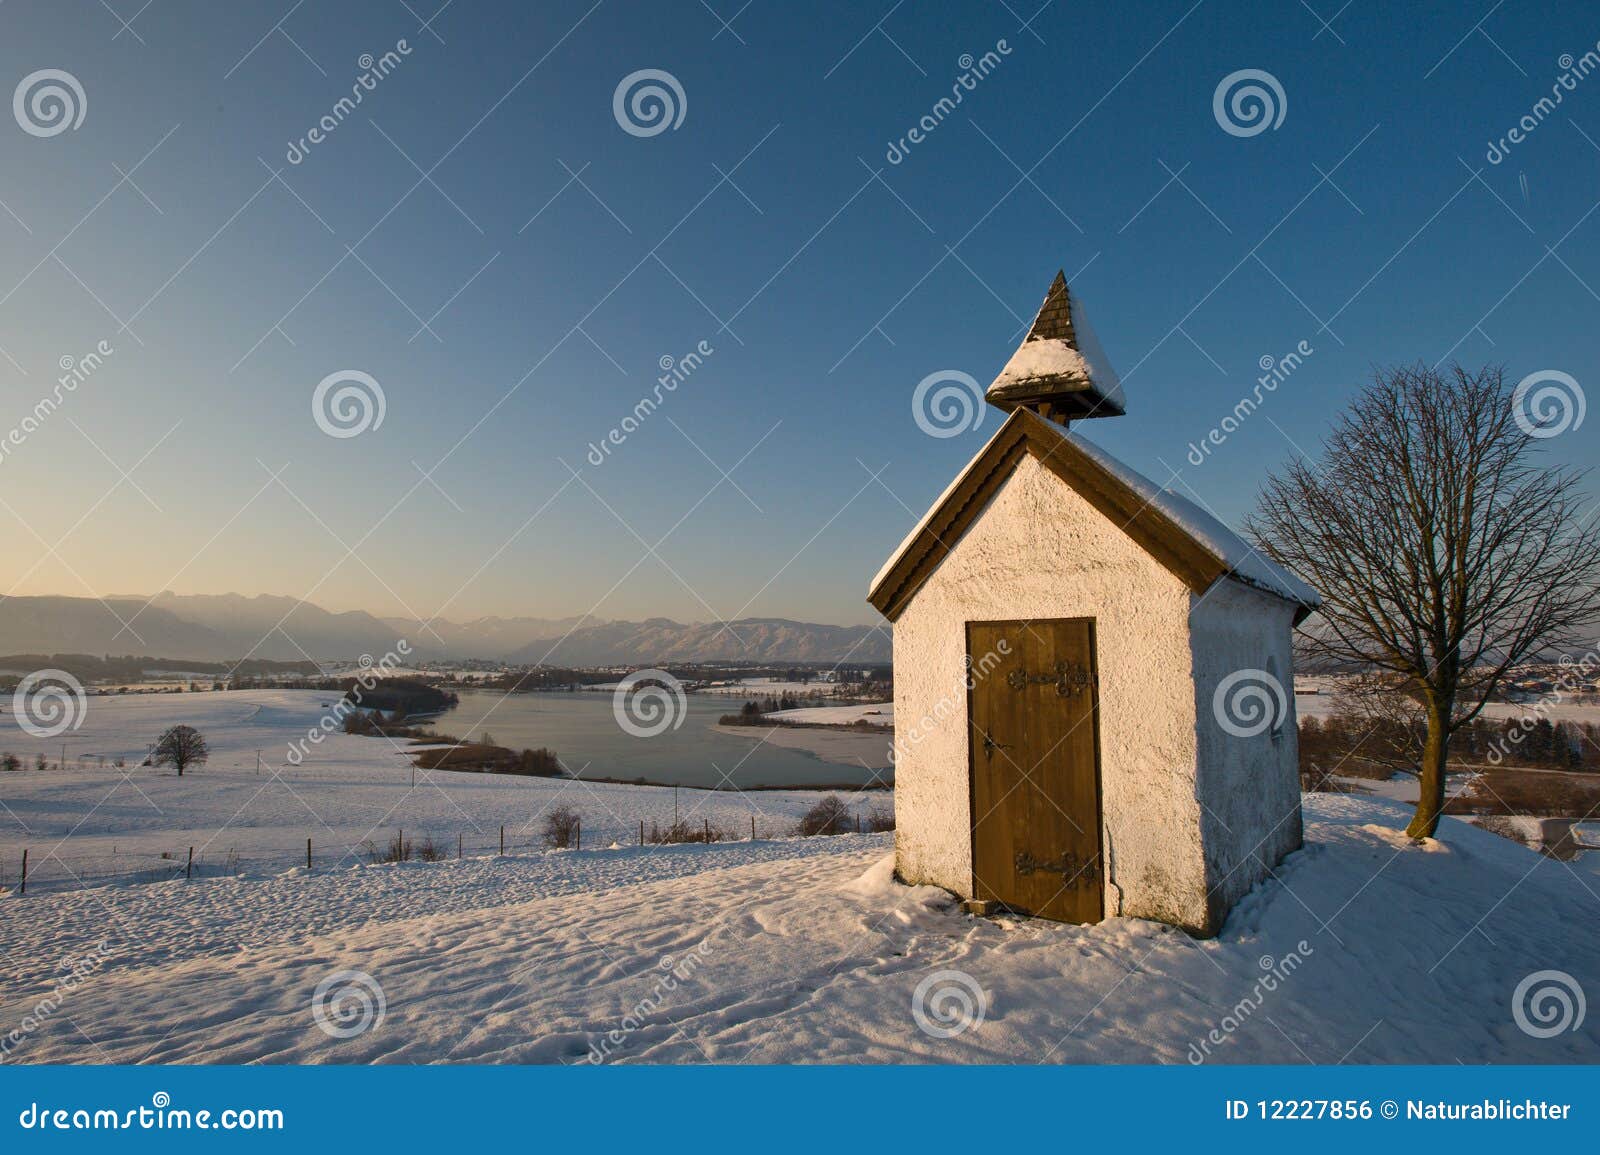 shed in wintry landscape